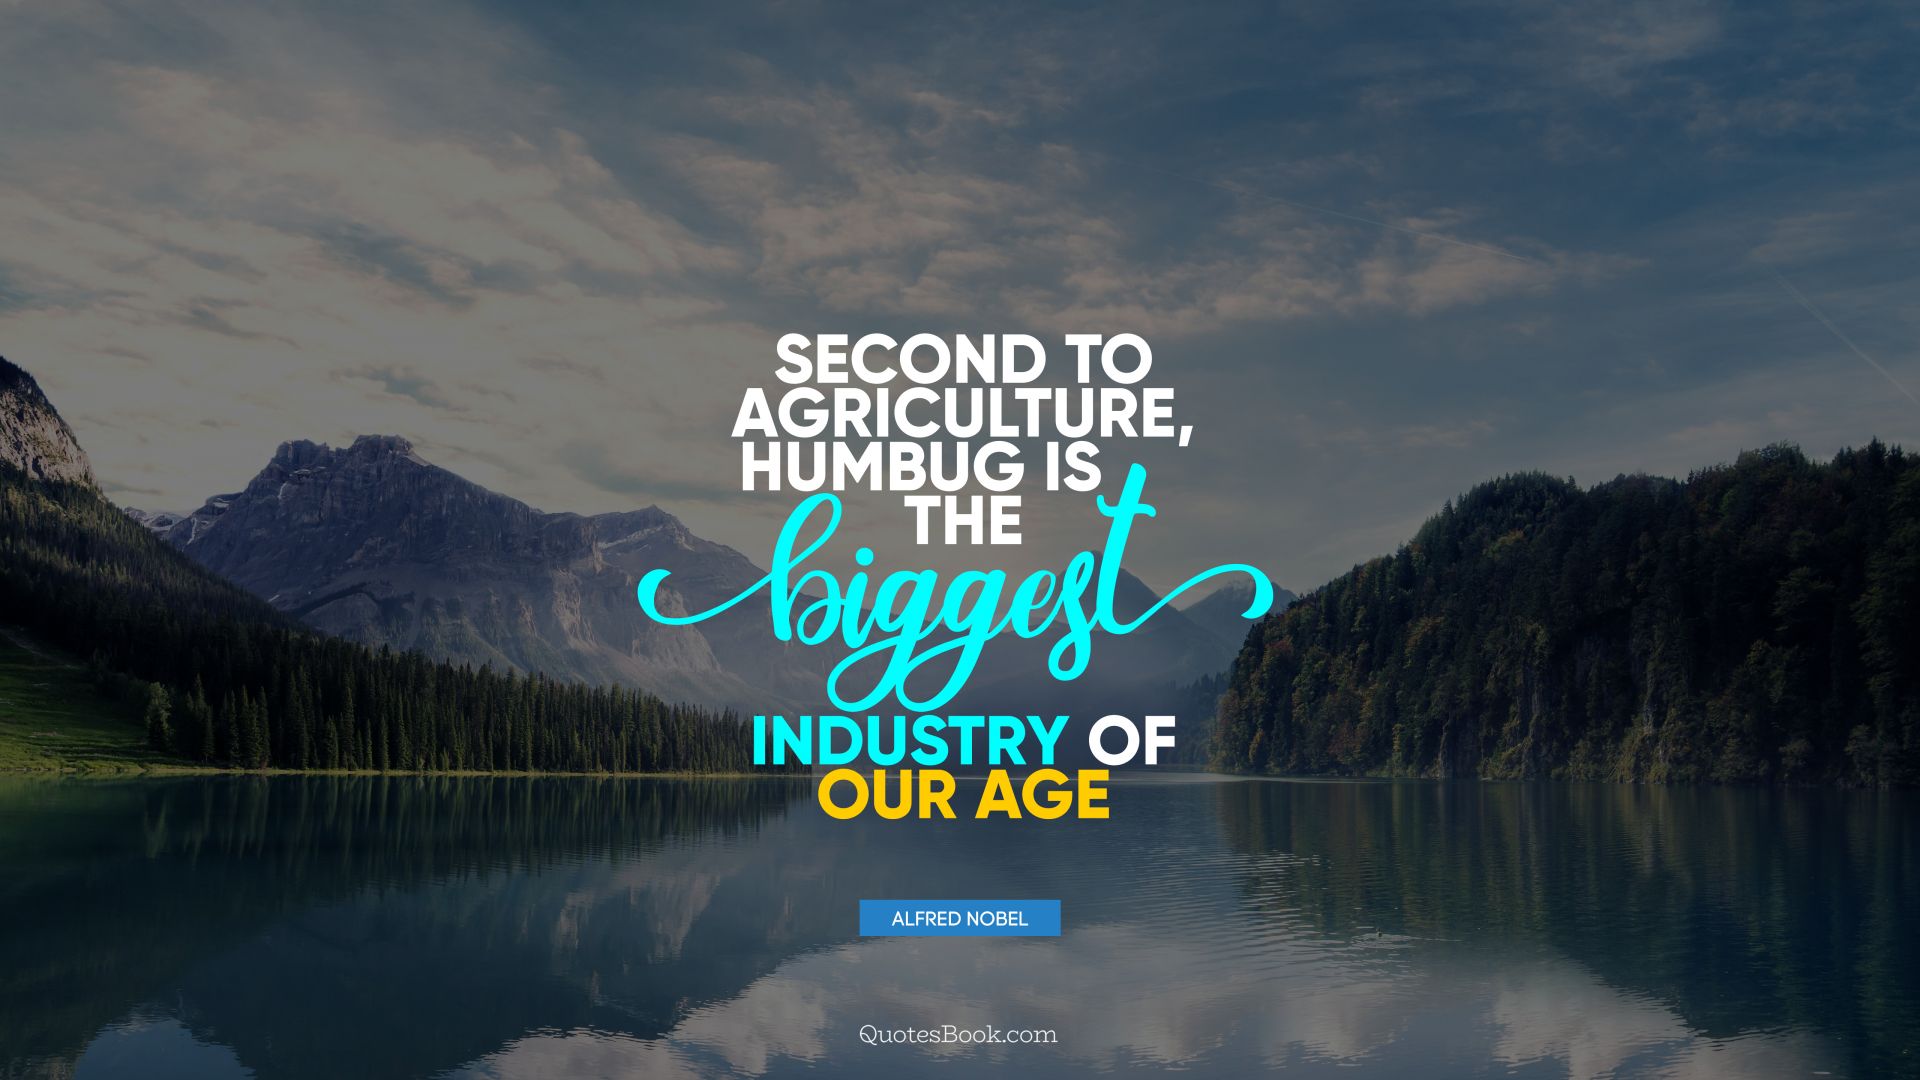 Second to agriculture, humbug is the biggest industry of our age. - Quote by Alfred Nobel